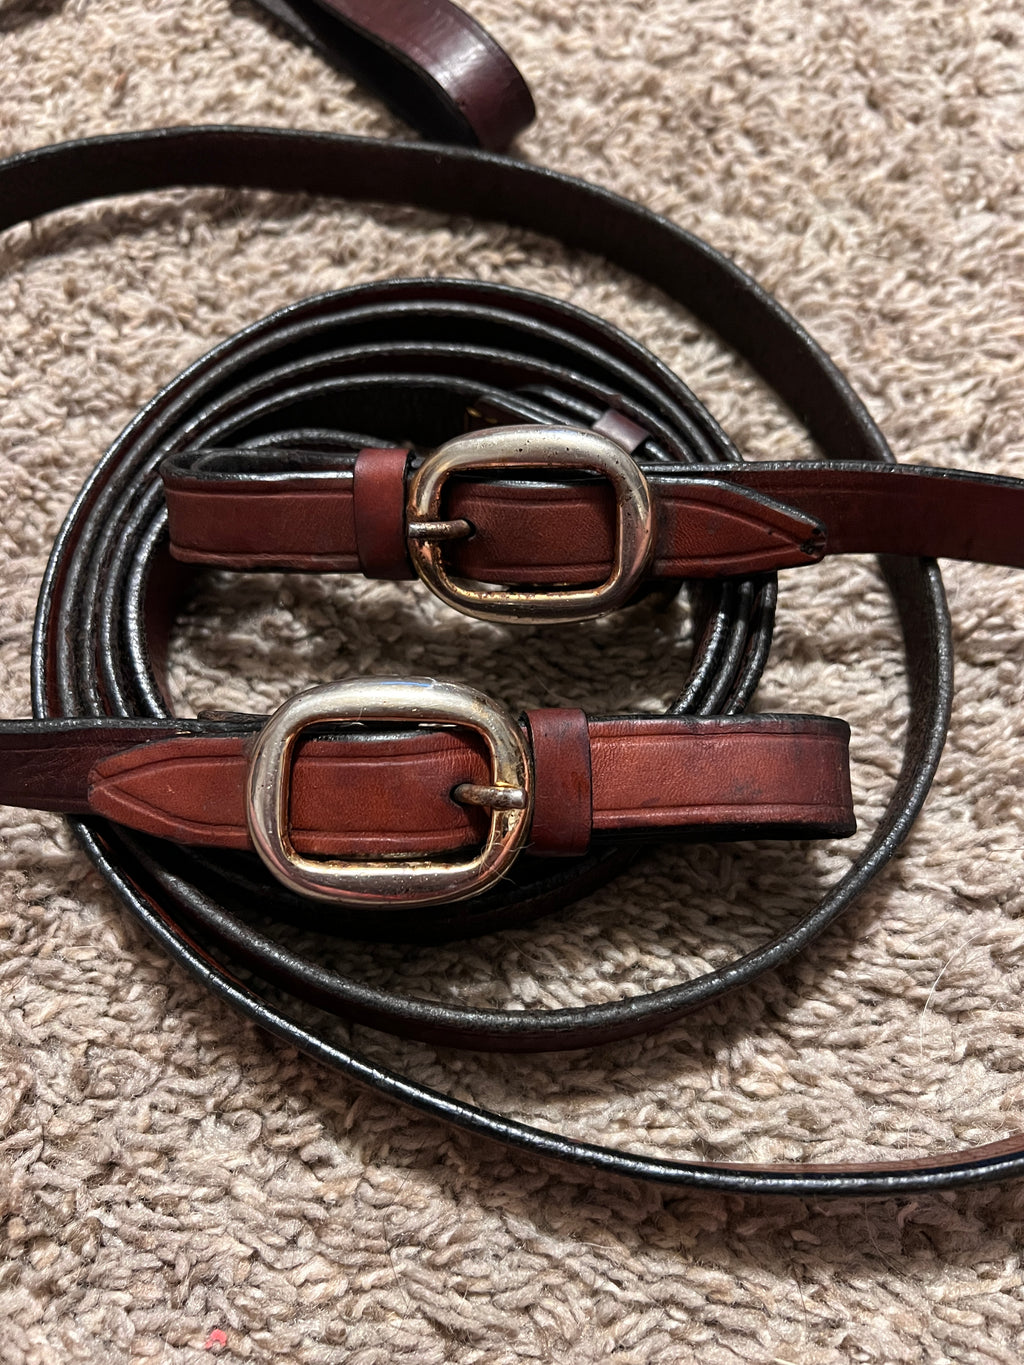 Barcoo-Style Headstall and Reins